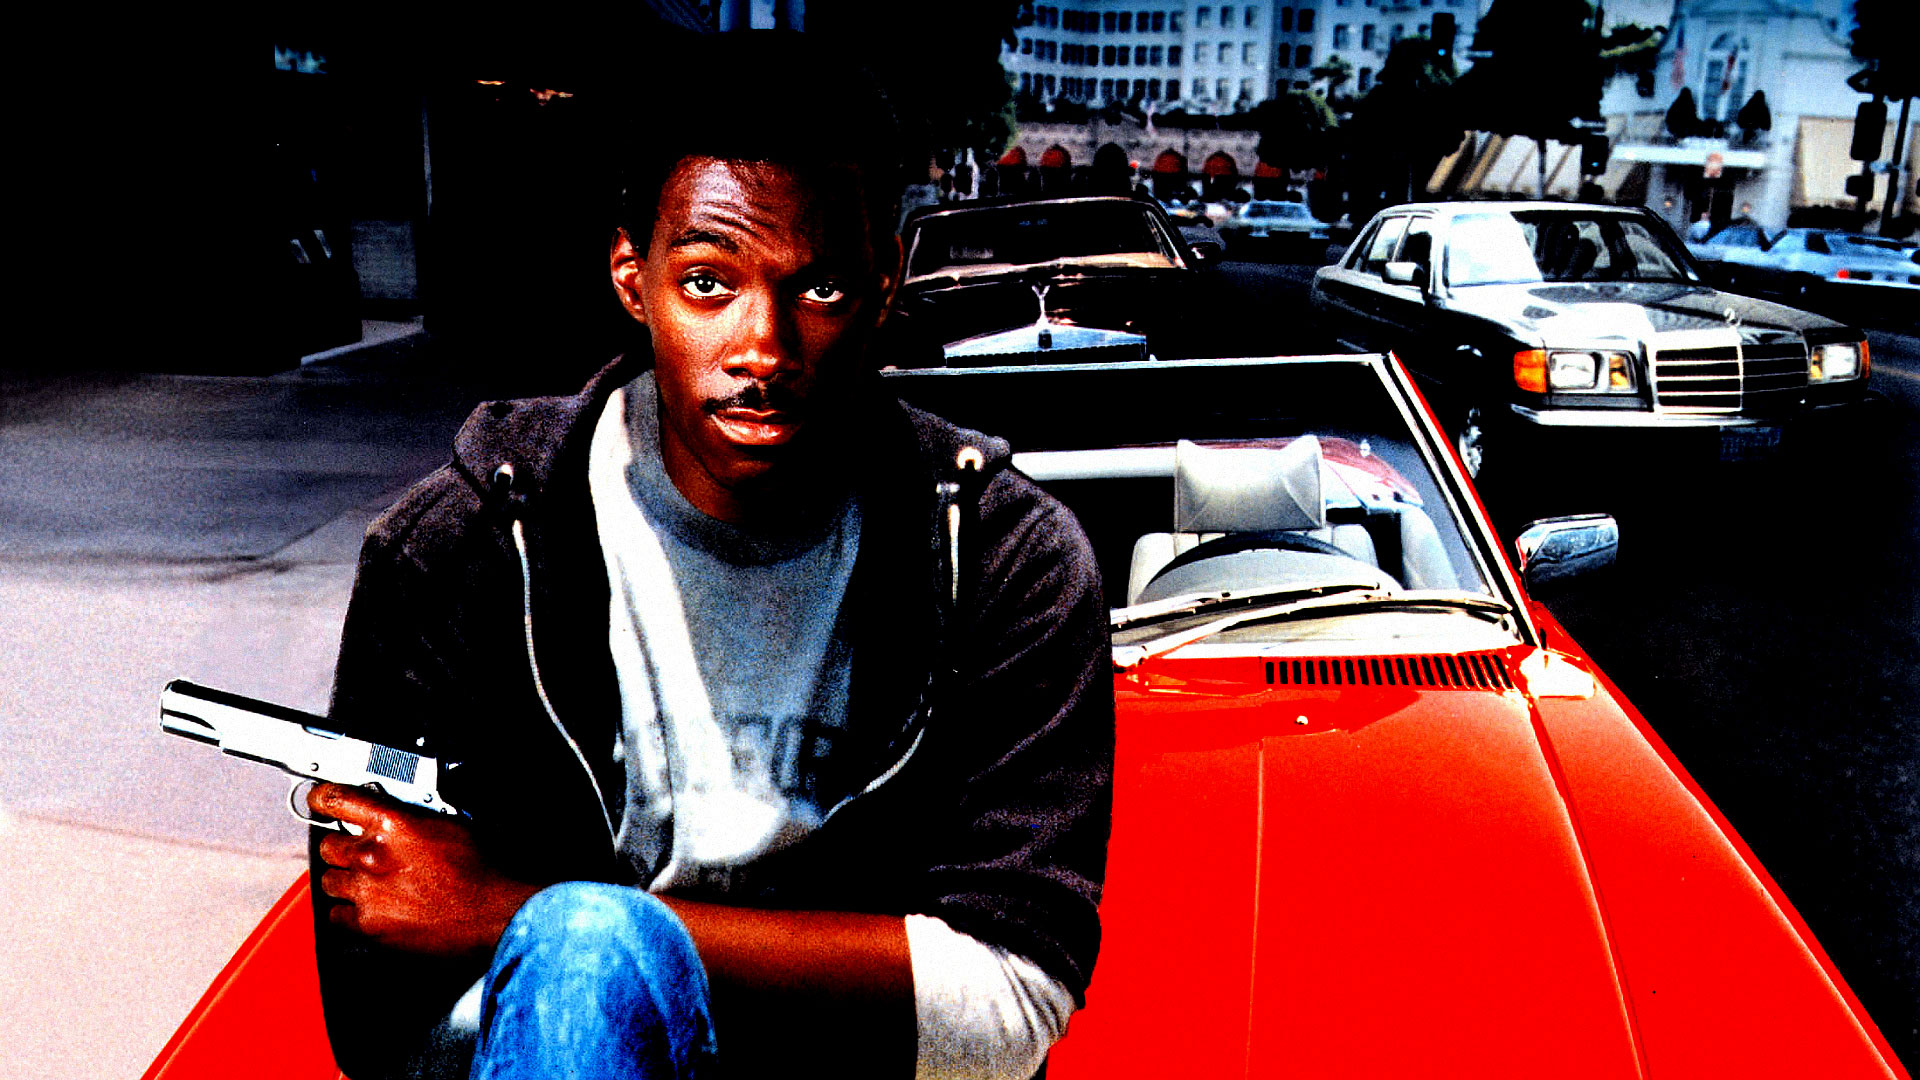 Windows Backgrounds movie, beverly hills cop